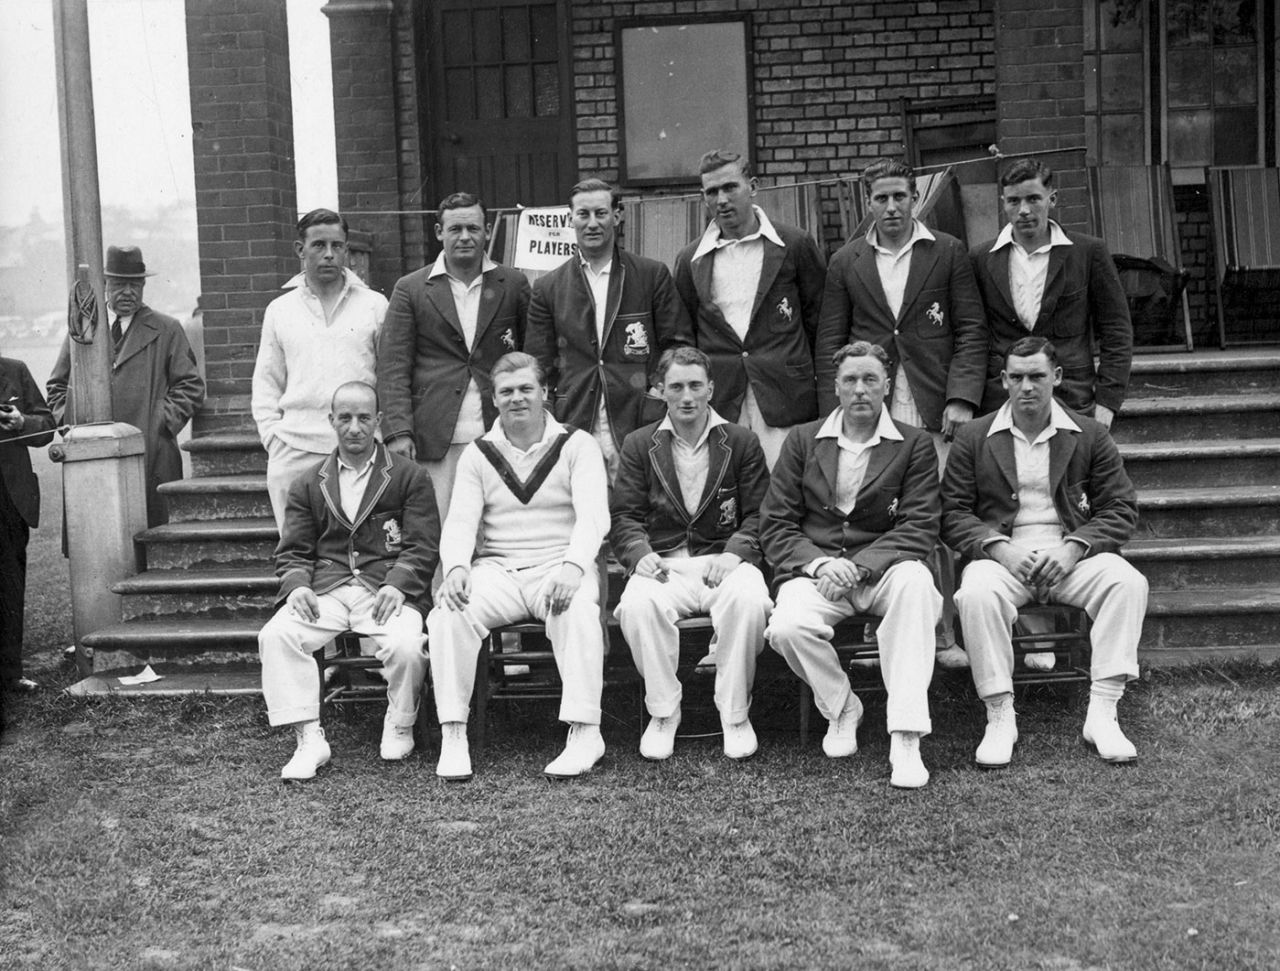 Members of the Kent County Cricket team. Standing l to r, C Lewis, W Ashdown, Mr W H V Levett, A Watt, A Fagg D Wright. Sitting l to r, A P Freeman, Mr I Akers-Douglas, Mr B H Valentine, Frank Woolley (1887 - 1978), L Todd, May 15, 1936